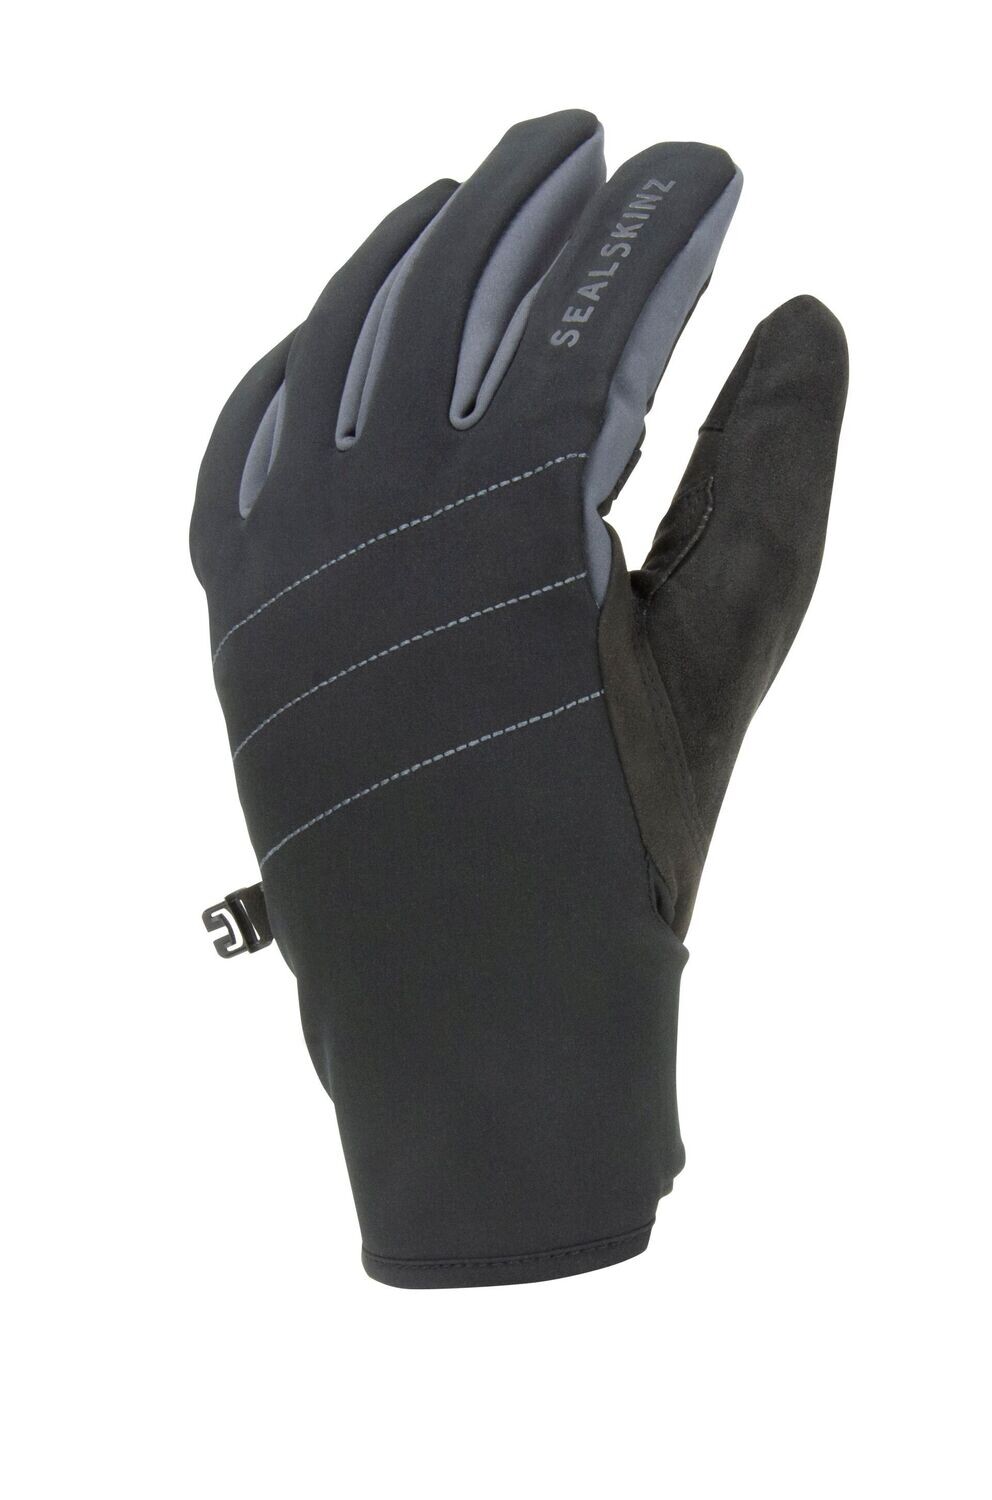 SealSkinz Waterproof All Weather Glove with Fusion Control™, Größe: S (7-8)